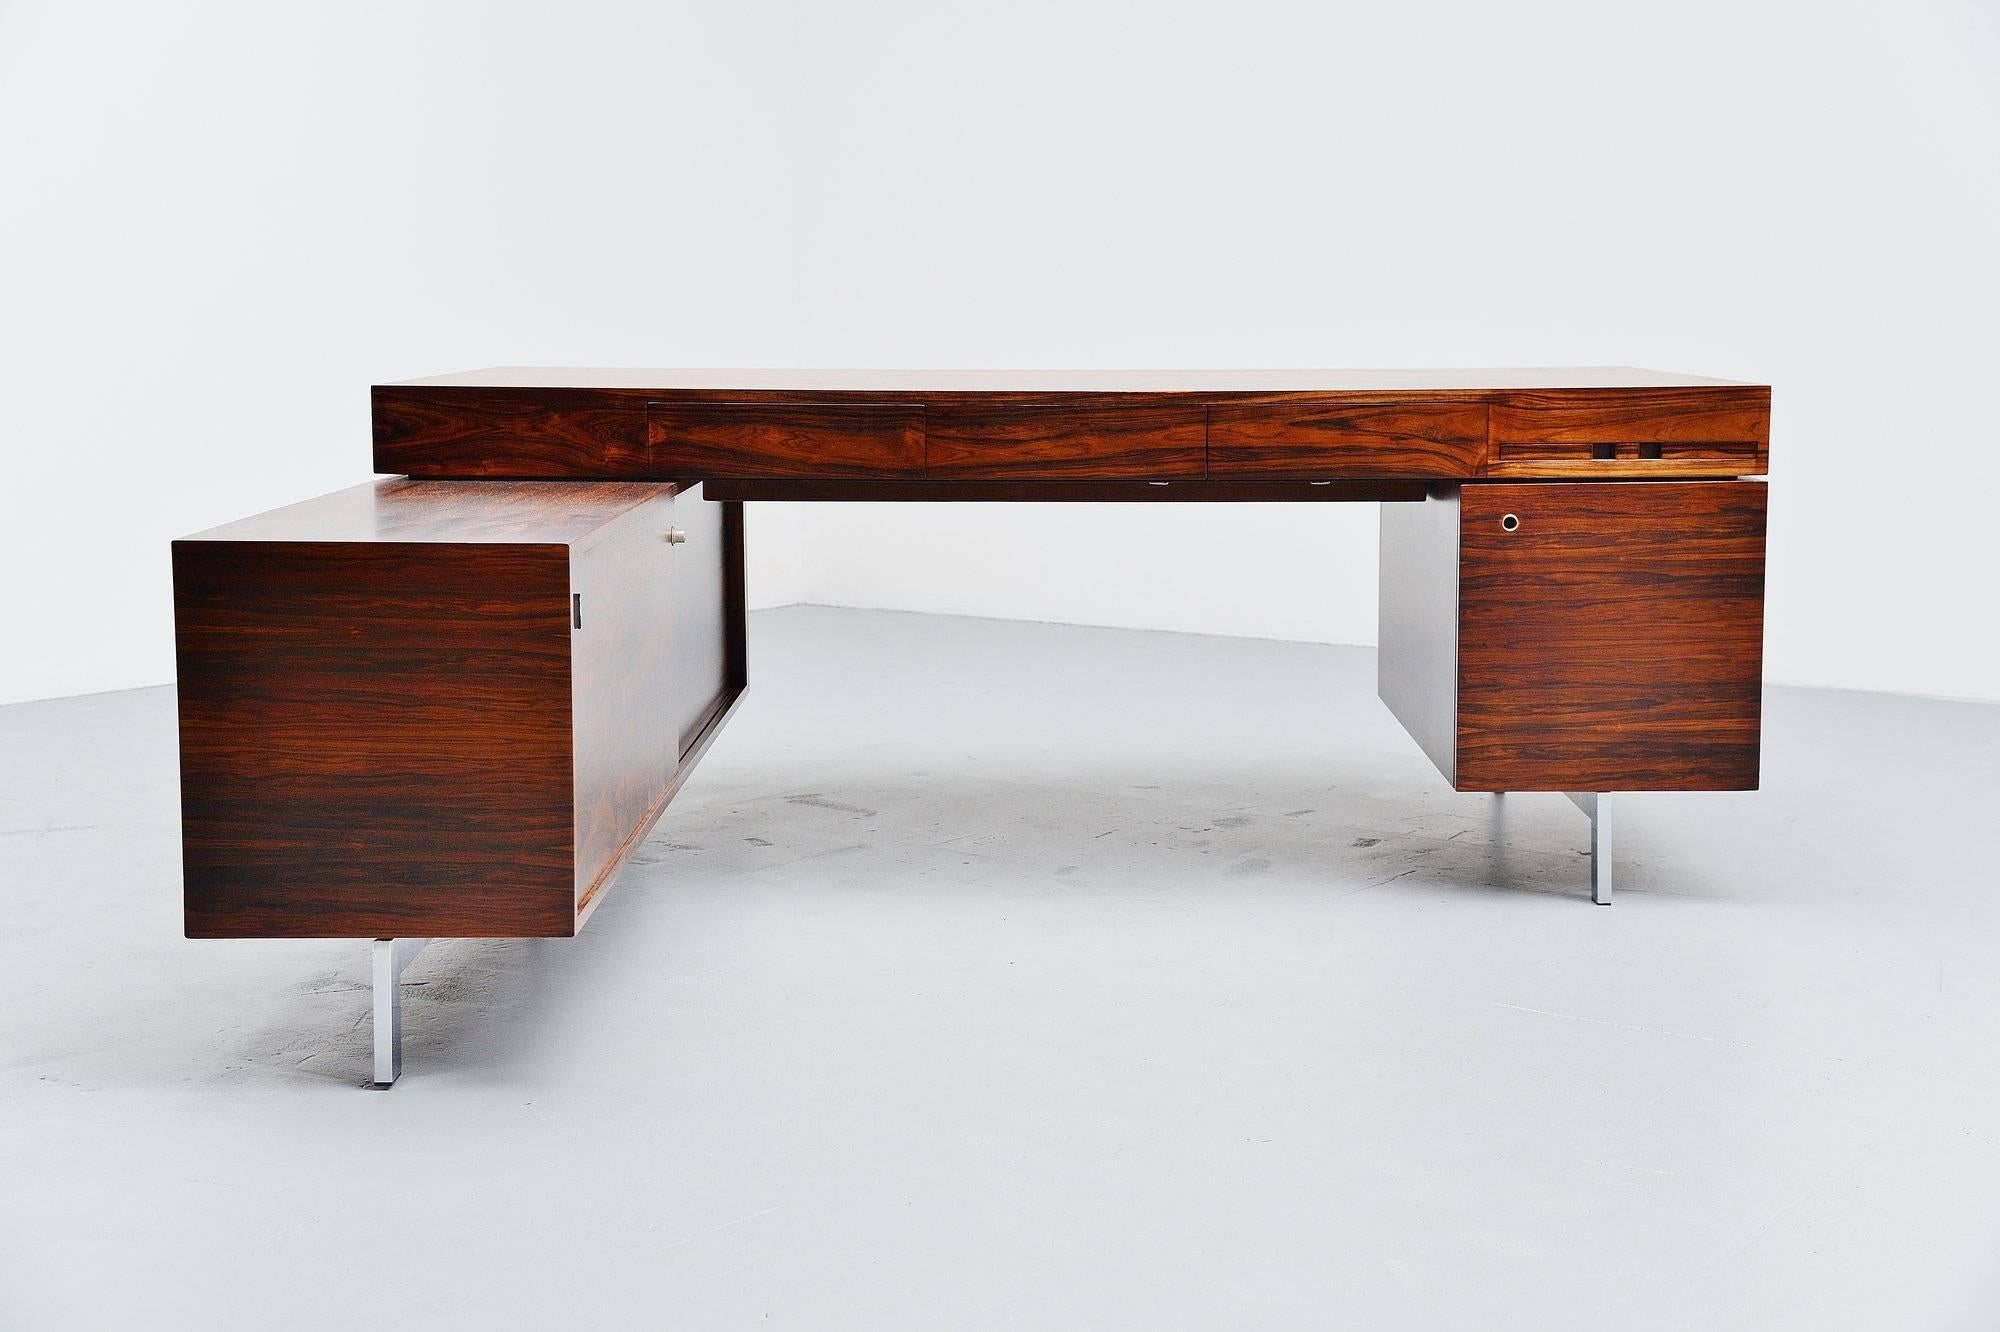 Fantastic large rosewood conference desk, Denmark, 1960. The desk is made of super quality rosewood veneer and is fully refinished. The desk has a very nice and warm grain to the rosewood. On the left there is a sideboard for storage and there are